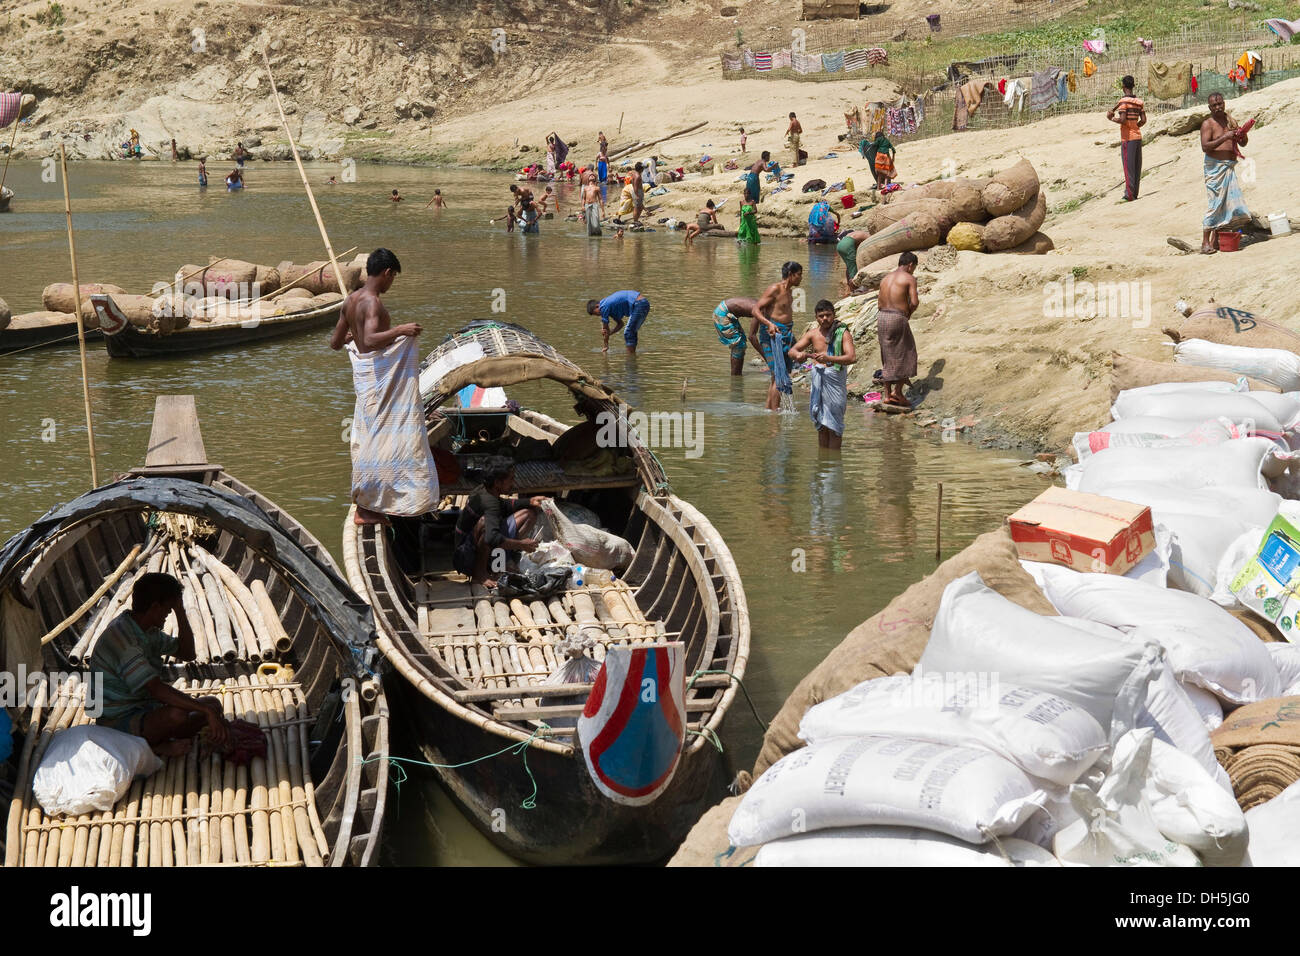 Bustling village life at a jetty, boating drivers resting, villagers washing themselves and their clothes, Ruma Bazar Stock Photo